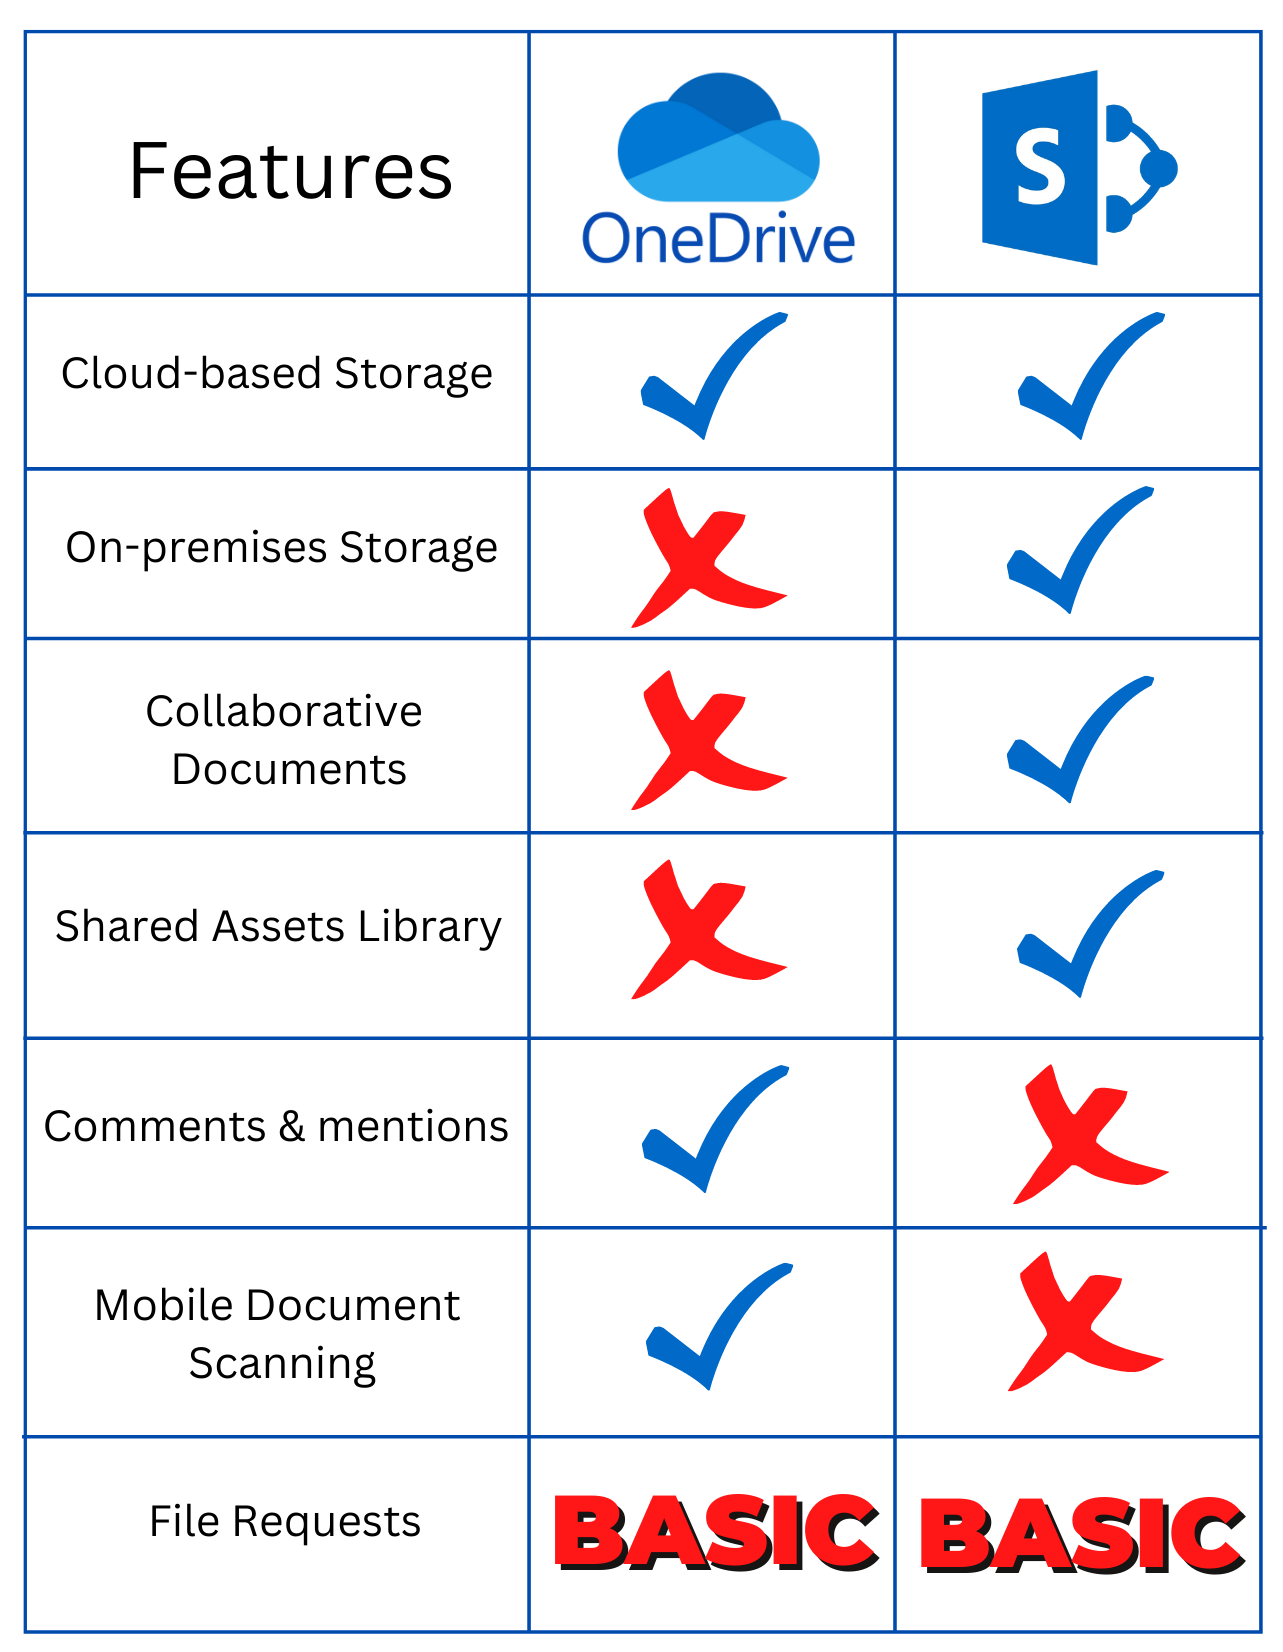 Features comparison between SharePoint and OneDrive